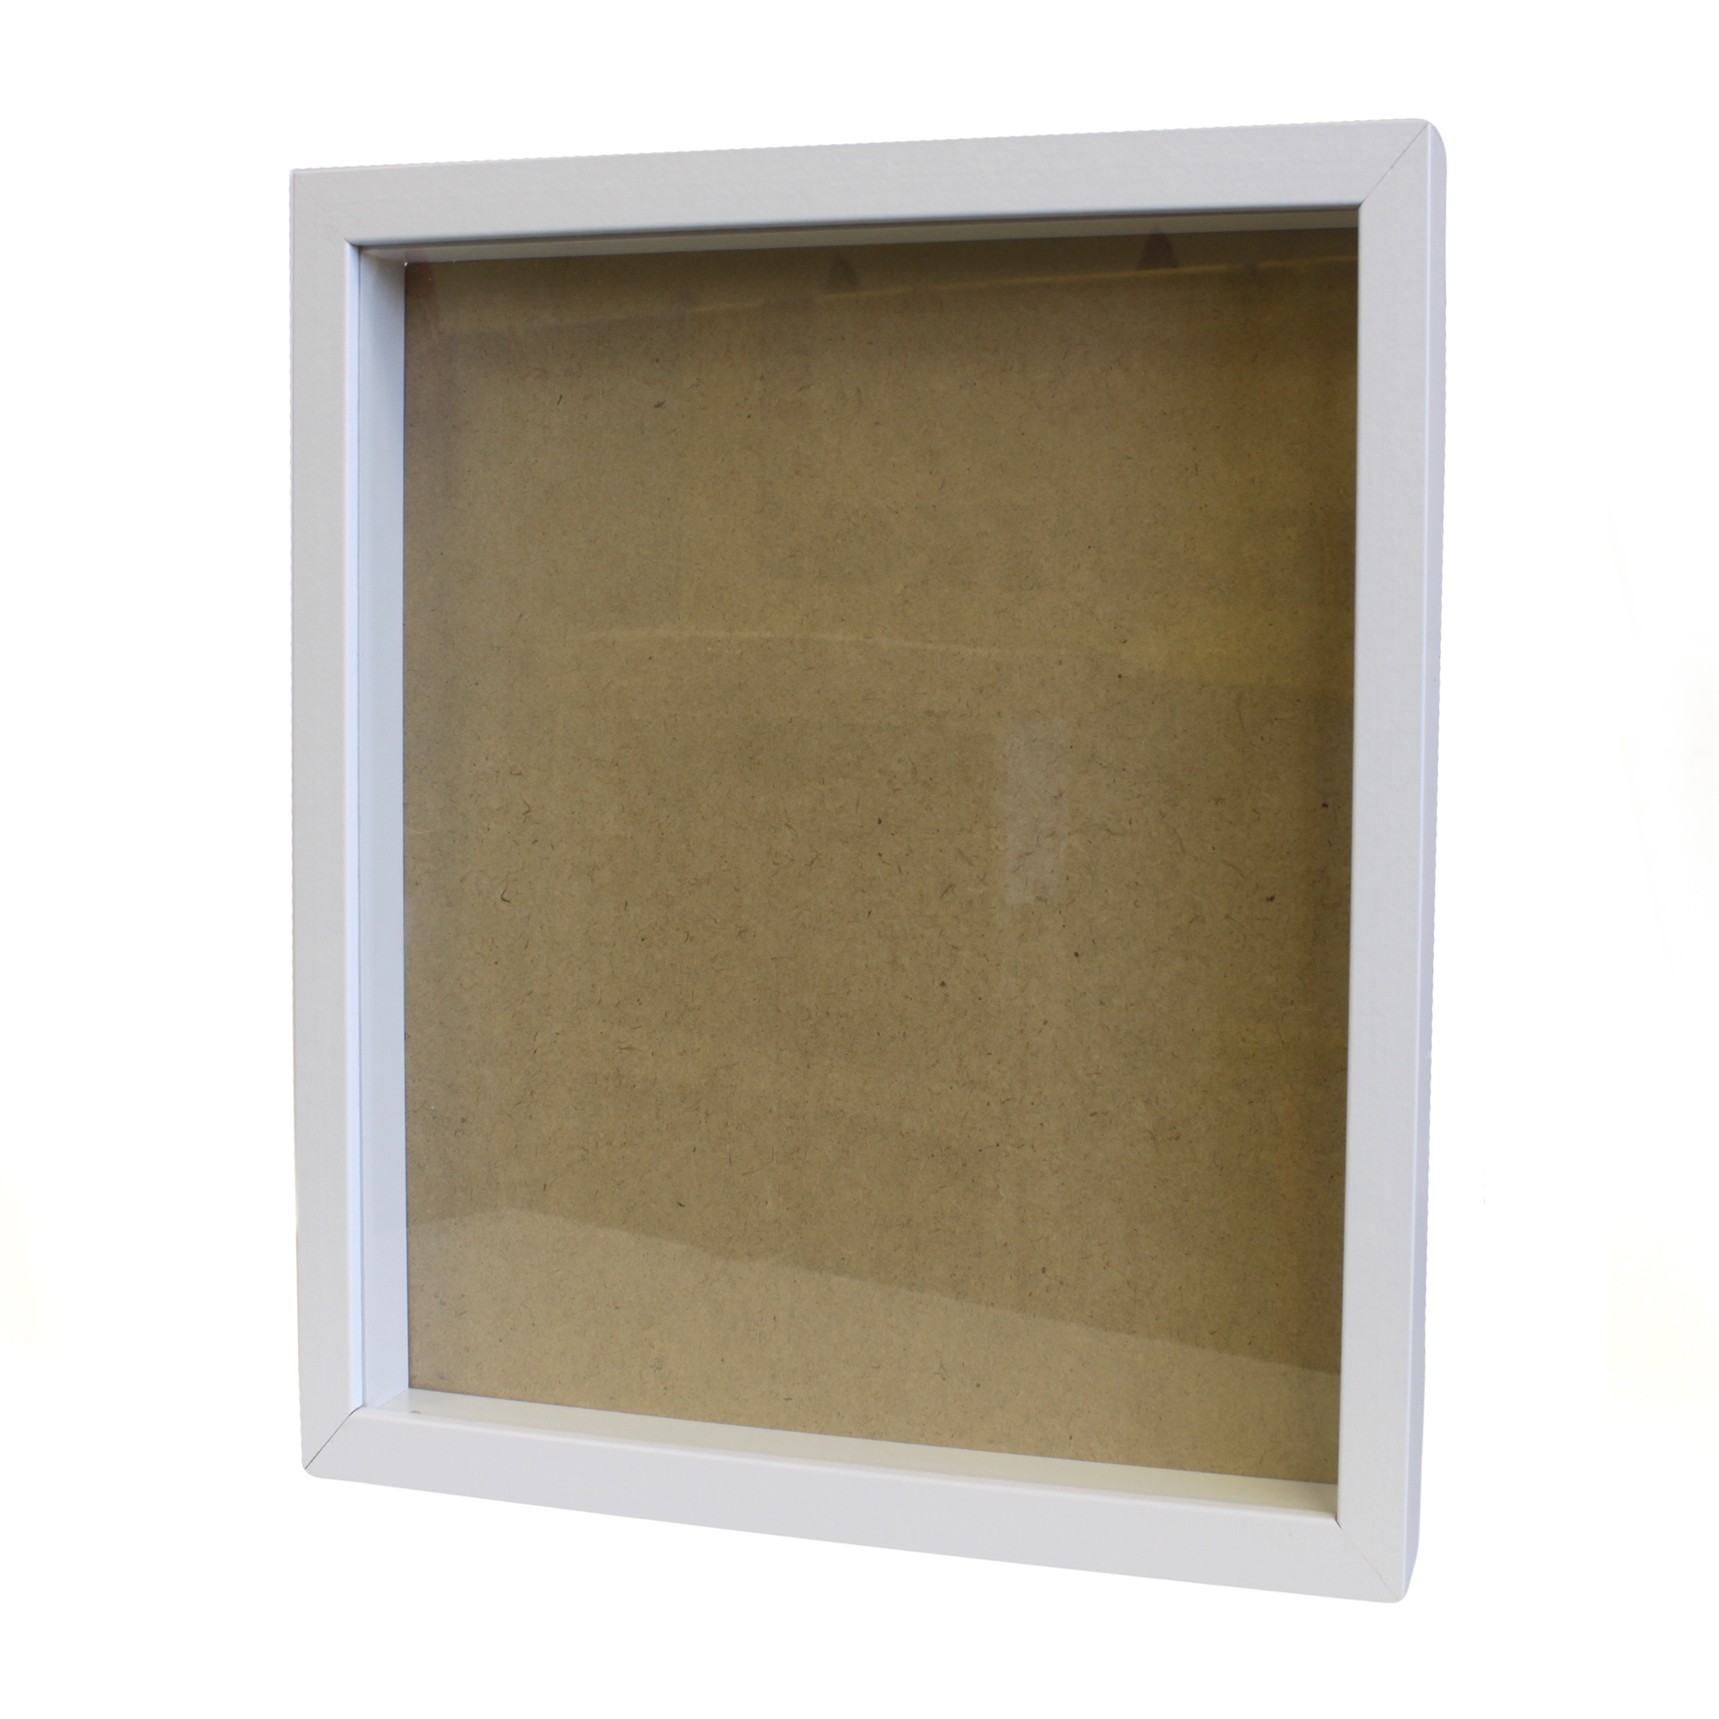 Wholesale Deep Box Picture Frame 14x12 inch - White - Ancient Wisdom ...